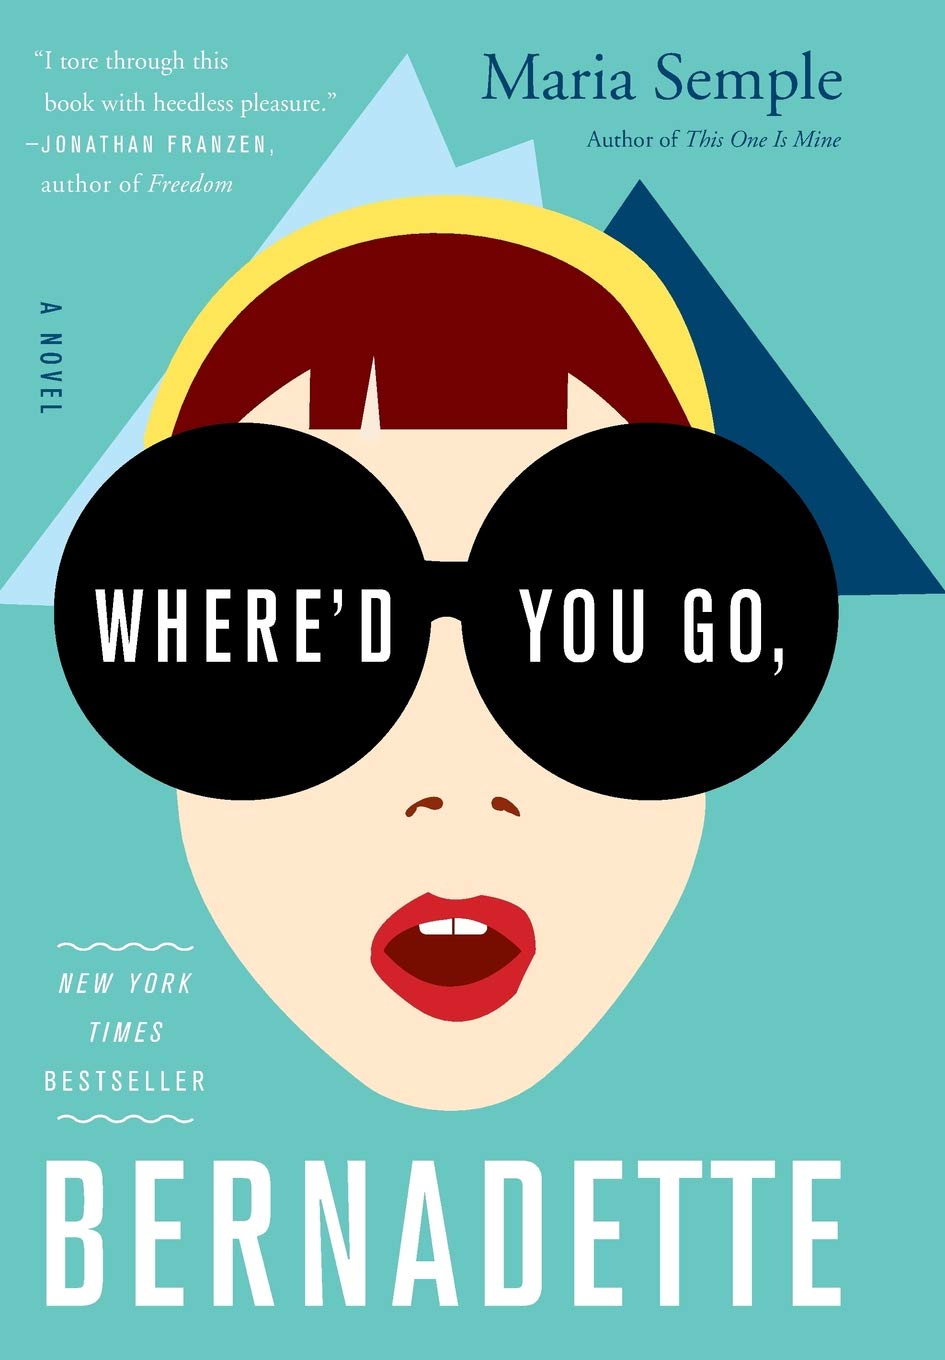 A colorful book cover for "where'd you go, bernadette" by maria semple, featuring a stylized illustration of a woman with large sunglasses, bold red lips, and a visible phrase of endorsement from jonathan franzen.